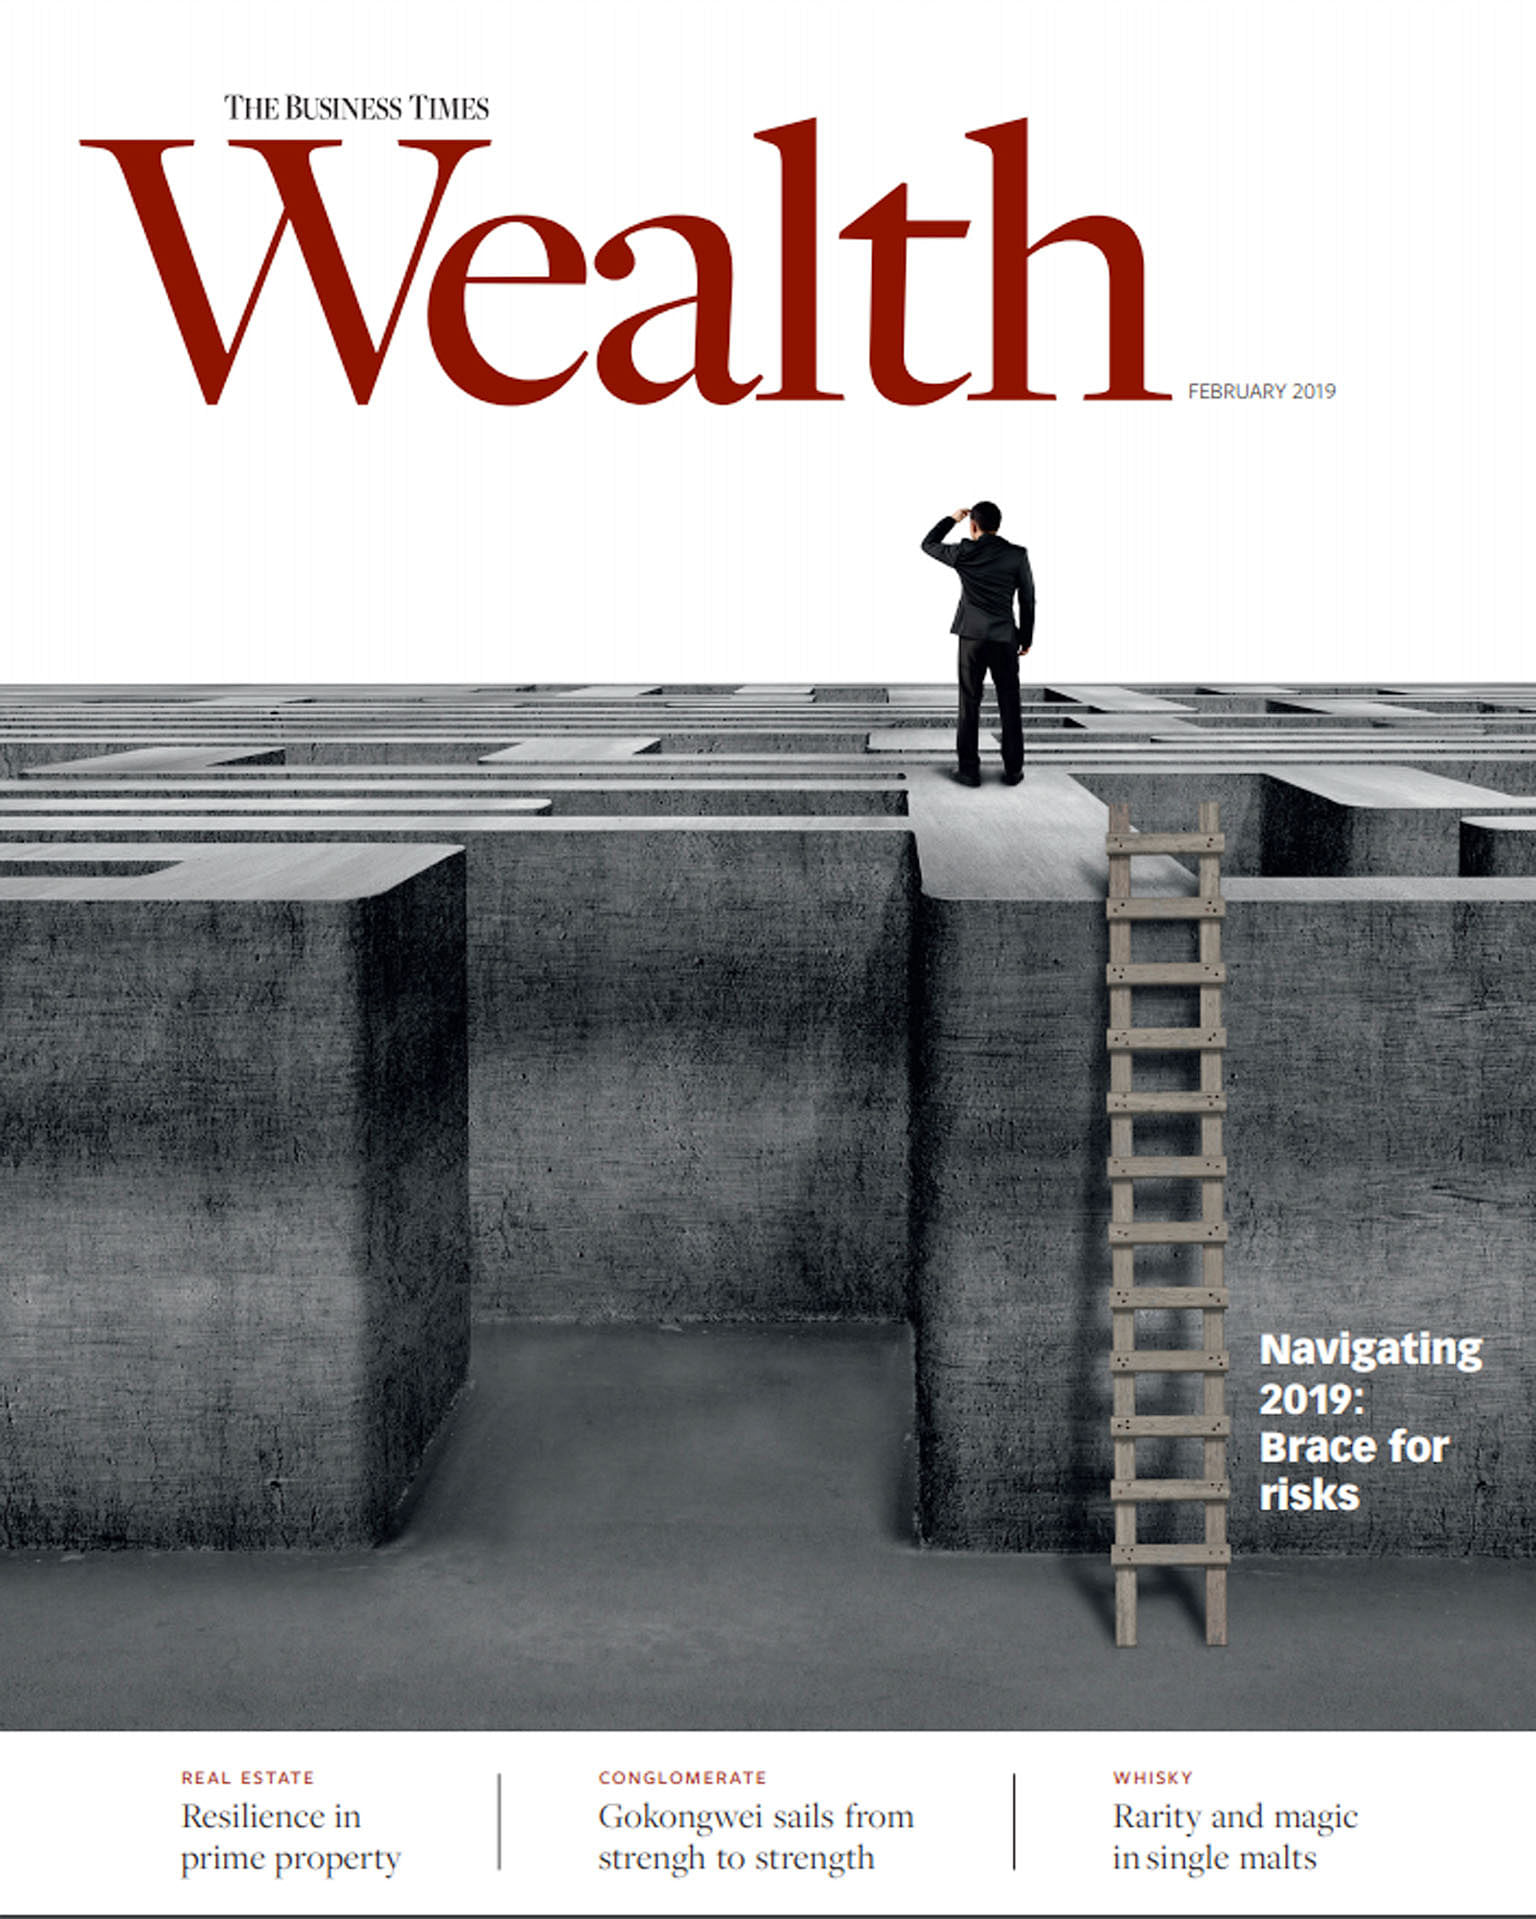 Wealth magazine's first edition for this year proffers a cogent view of asset markets at a time when volatility threatens to keep investors on the sidelines.